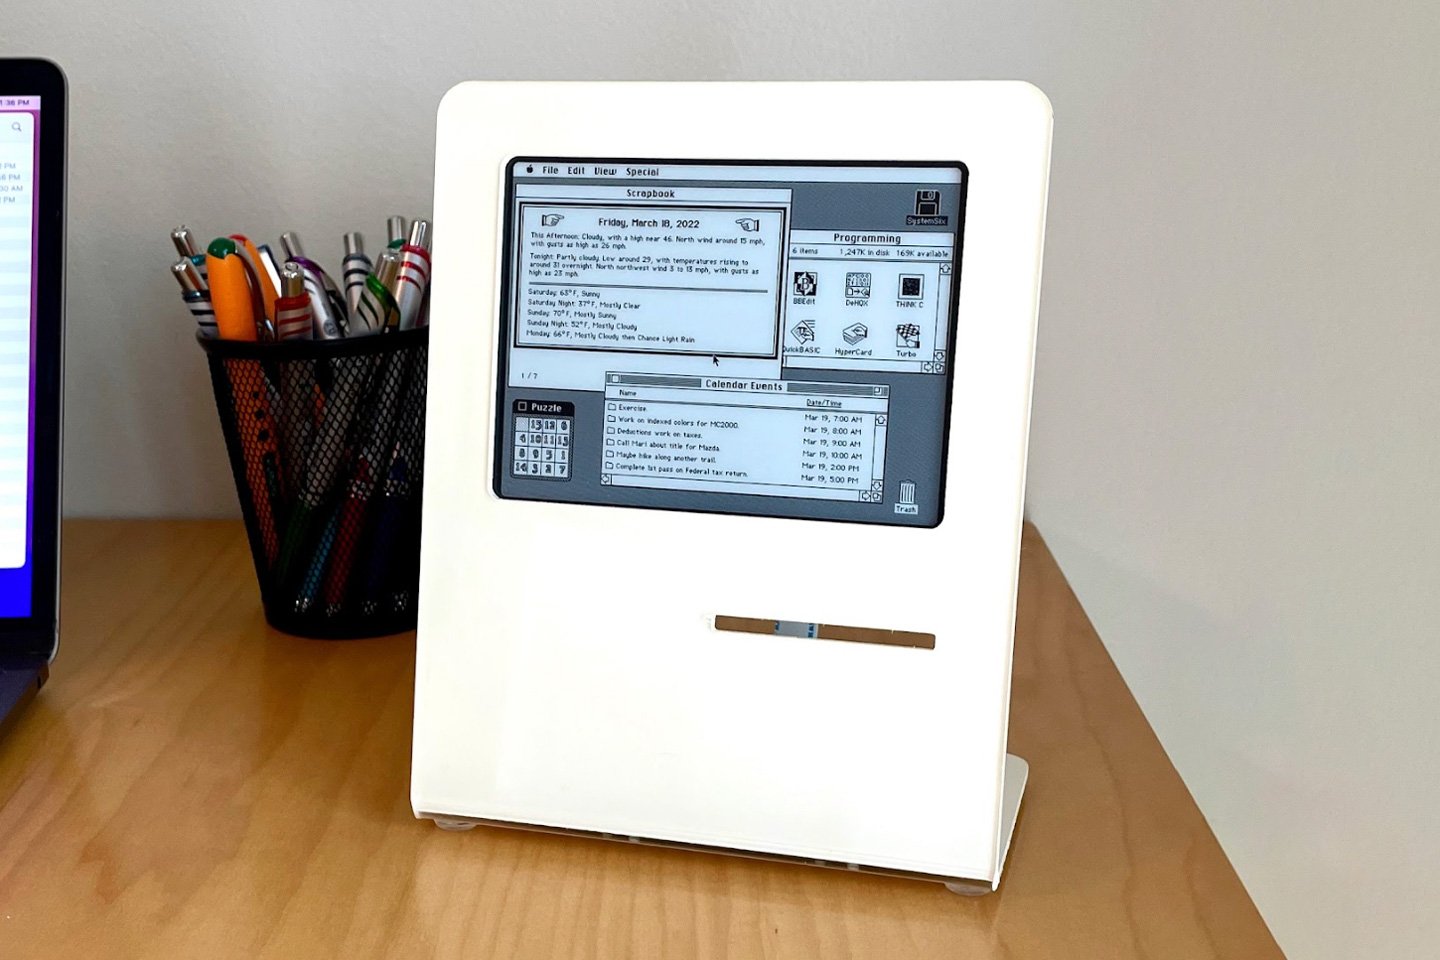 #Paper-thin retro Macintosh comes with an e-ink display and runs on a Raspberry Pi